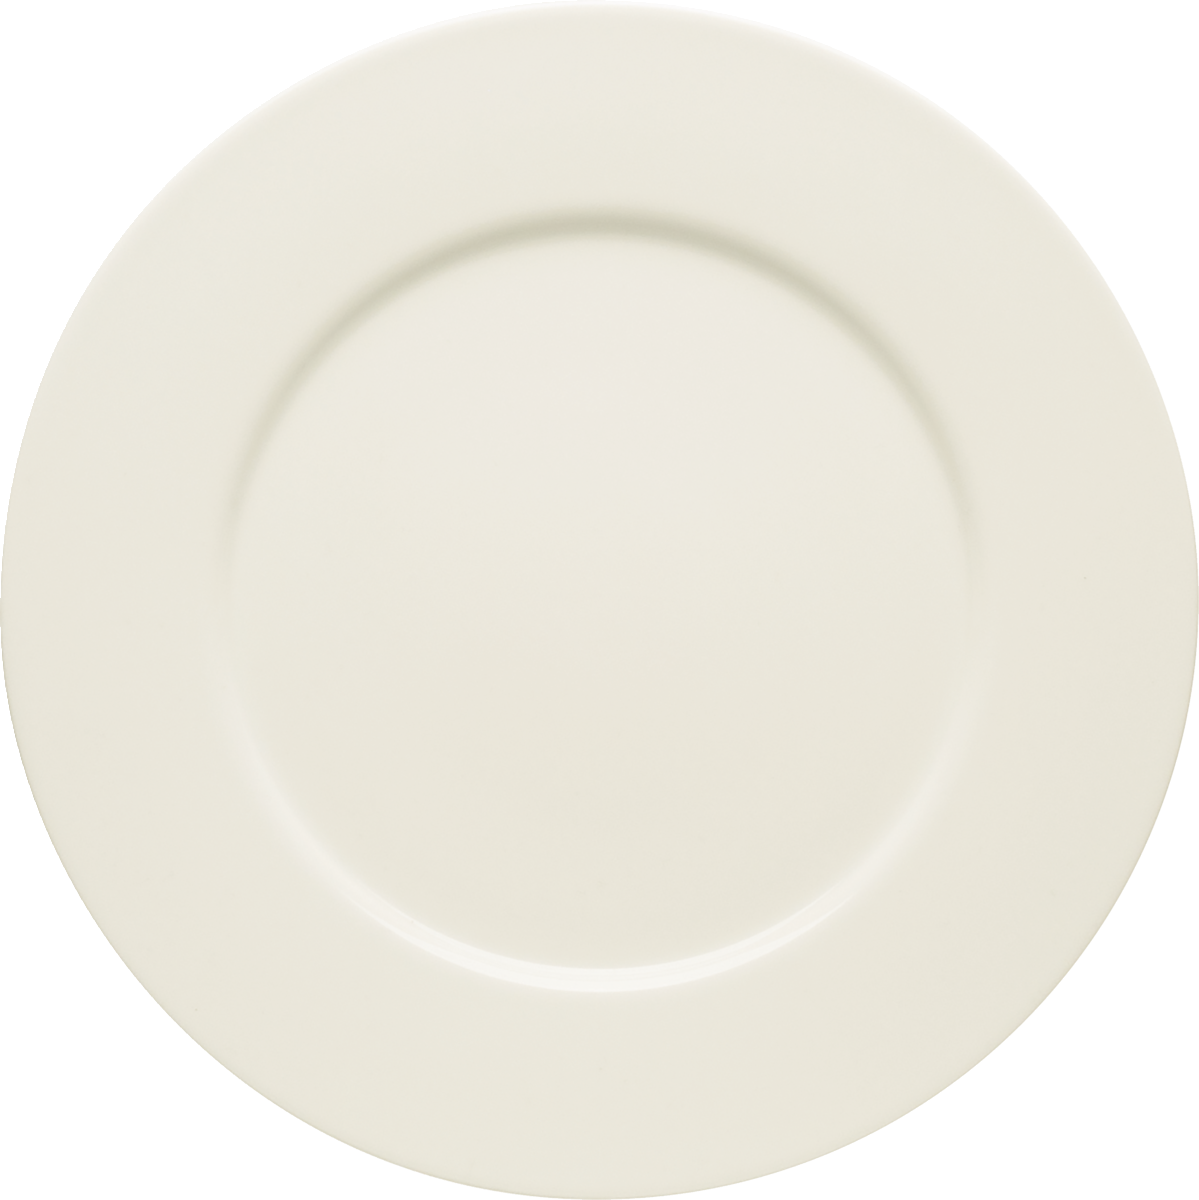 Plate flat round with rim 29cm